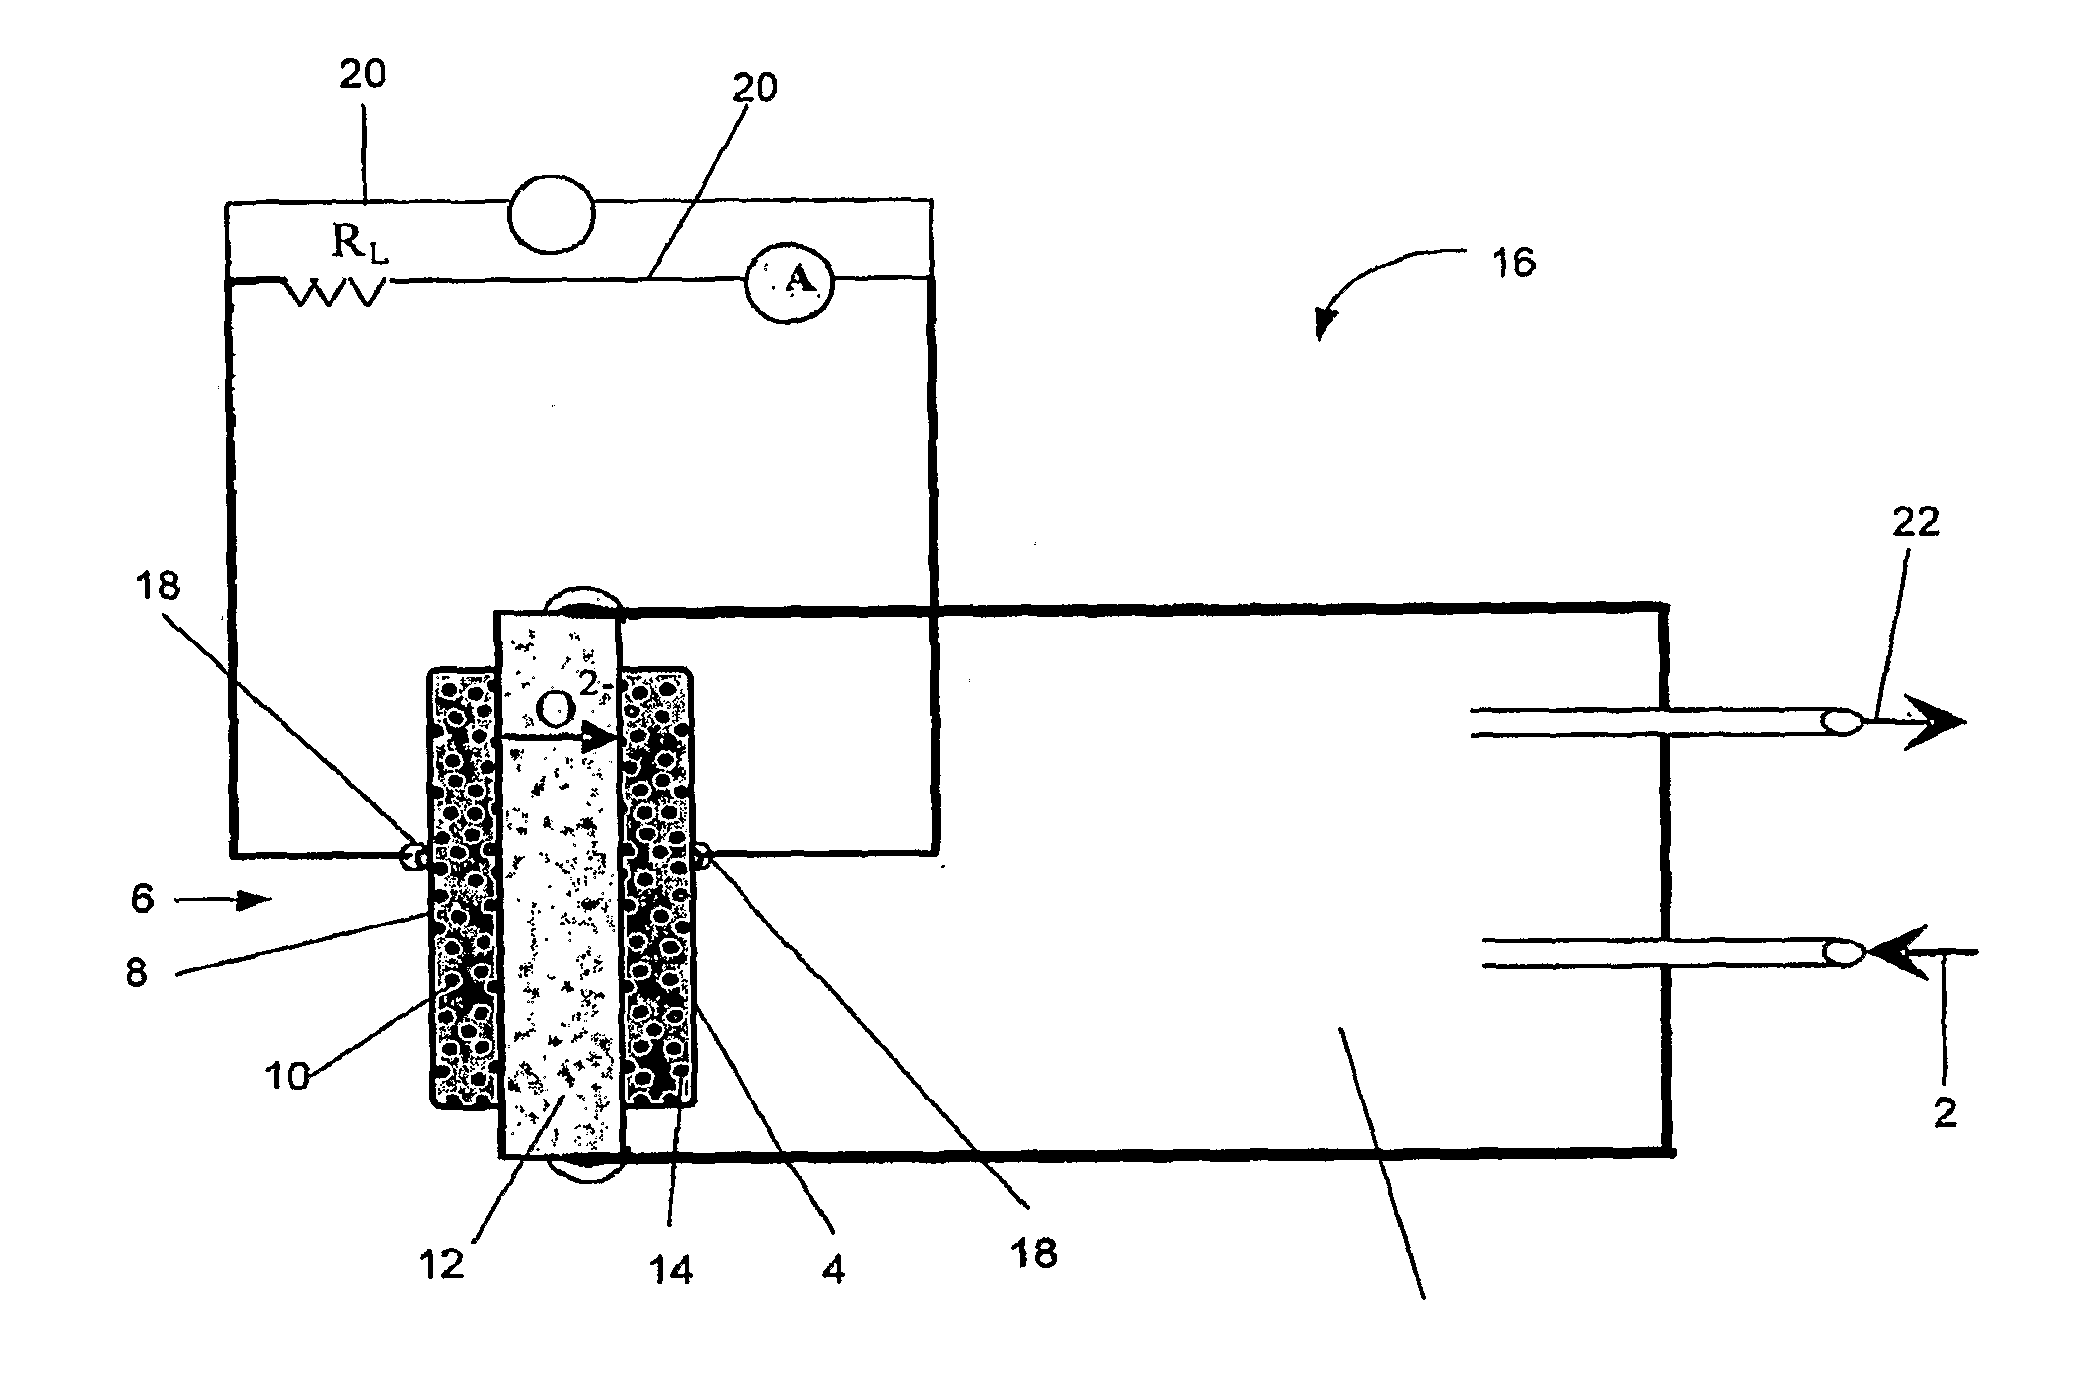 Catalysts compositions for use in fuel cells